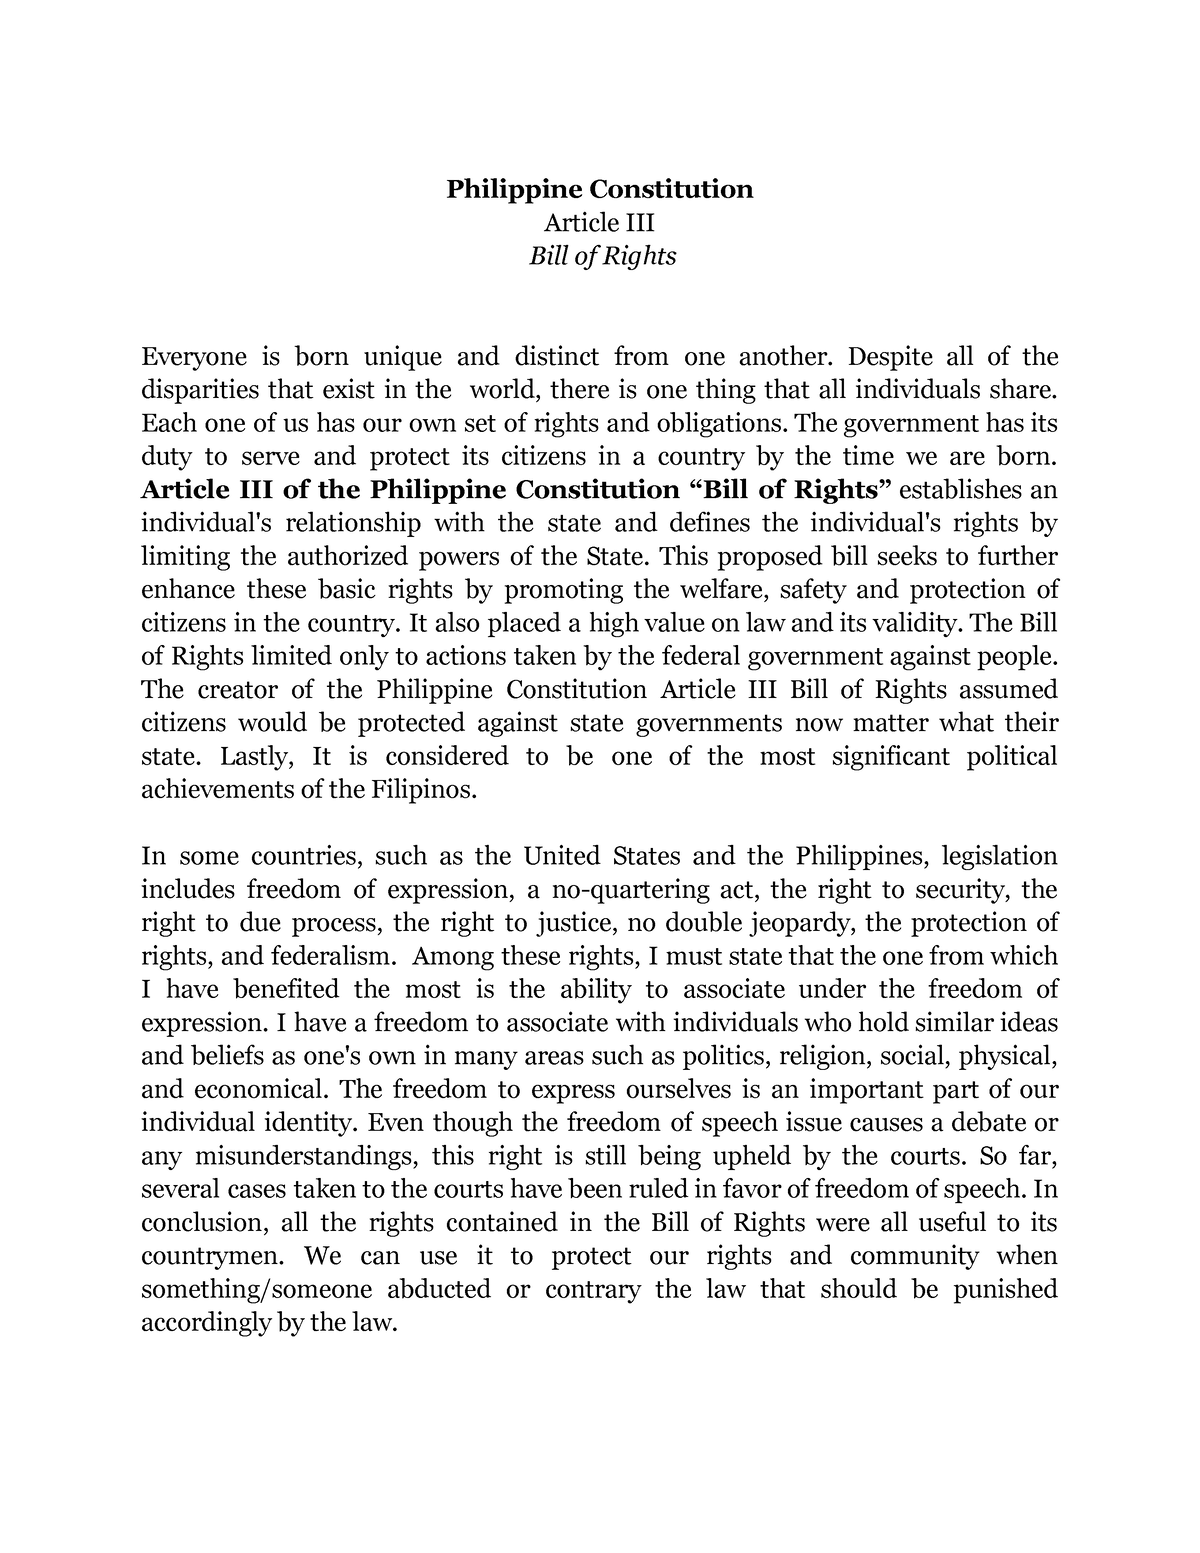 thesis about human rights in the philippines